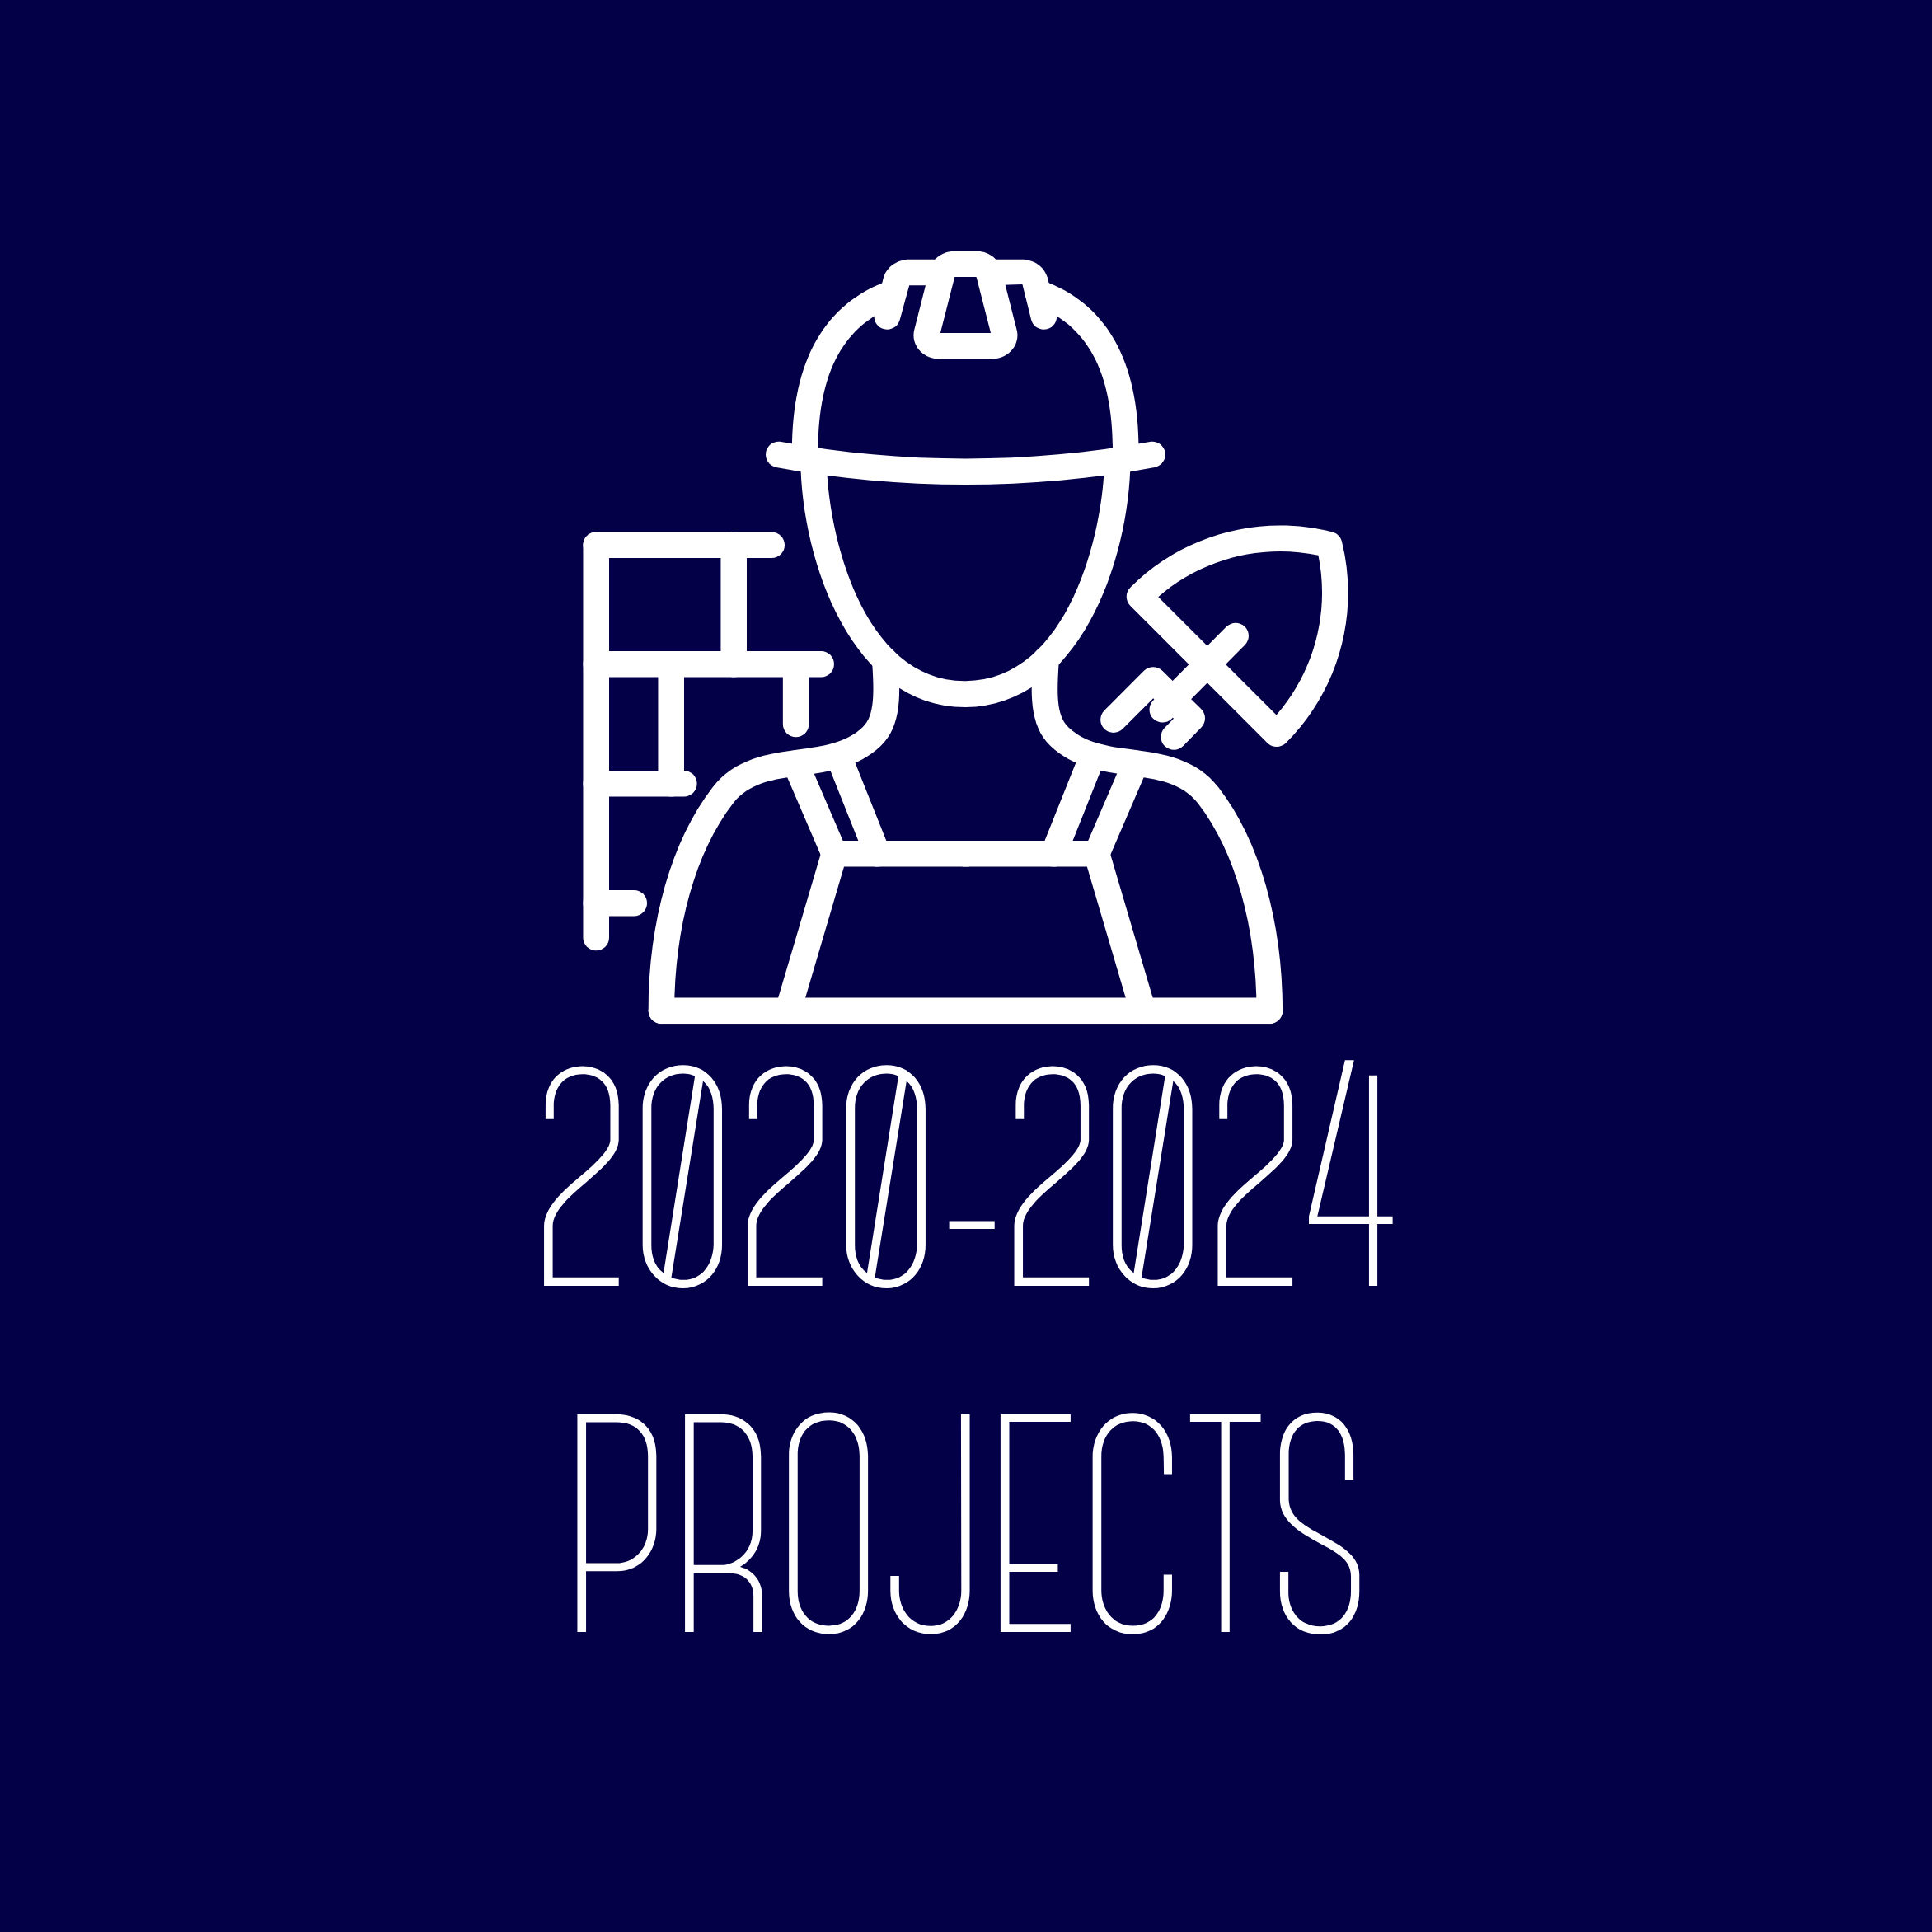 2020-2024 Projects